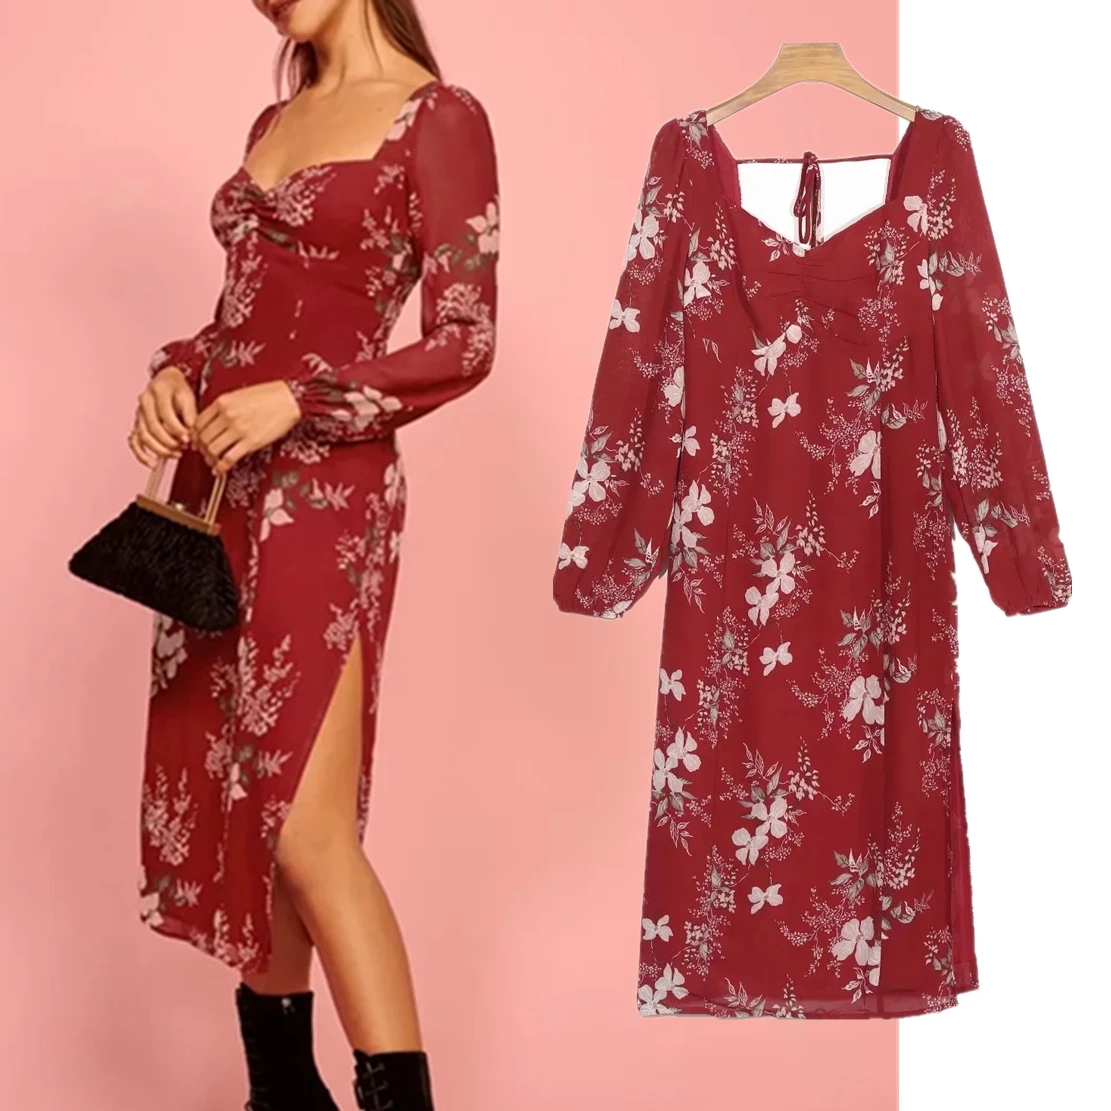 

Dave&Di French Style Indie Folk Vintage Red Floral PrintChiffon Square Collar Sheath Sexy Forking Sheath Party Midi Dress Women